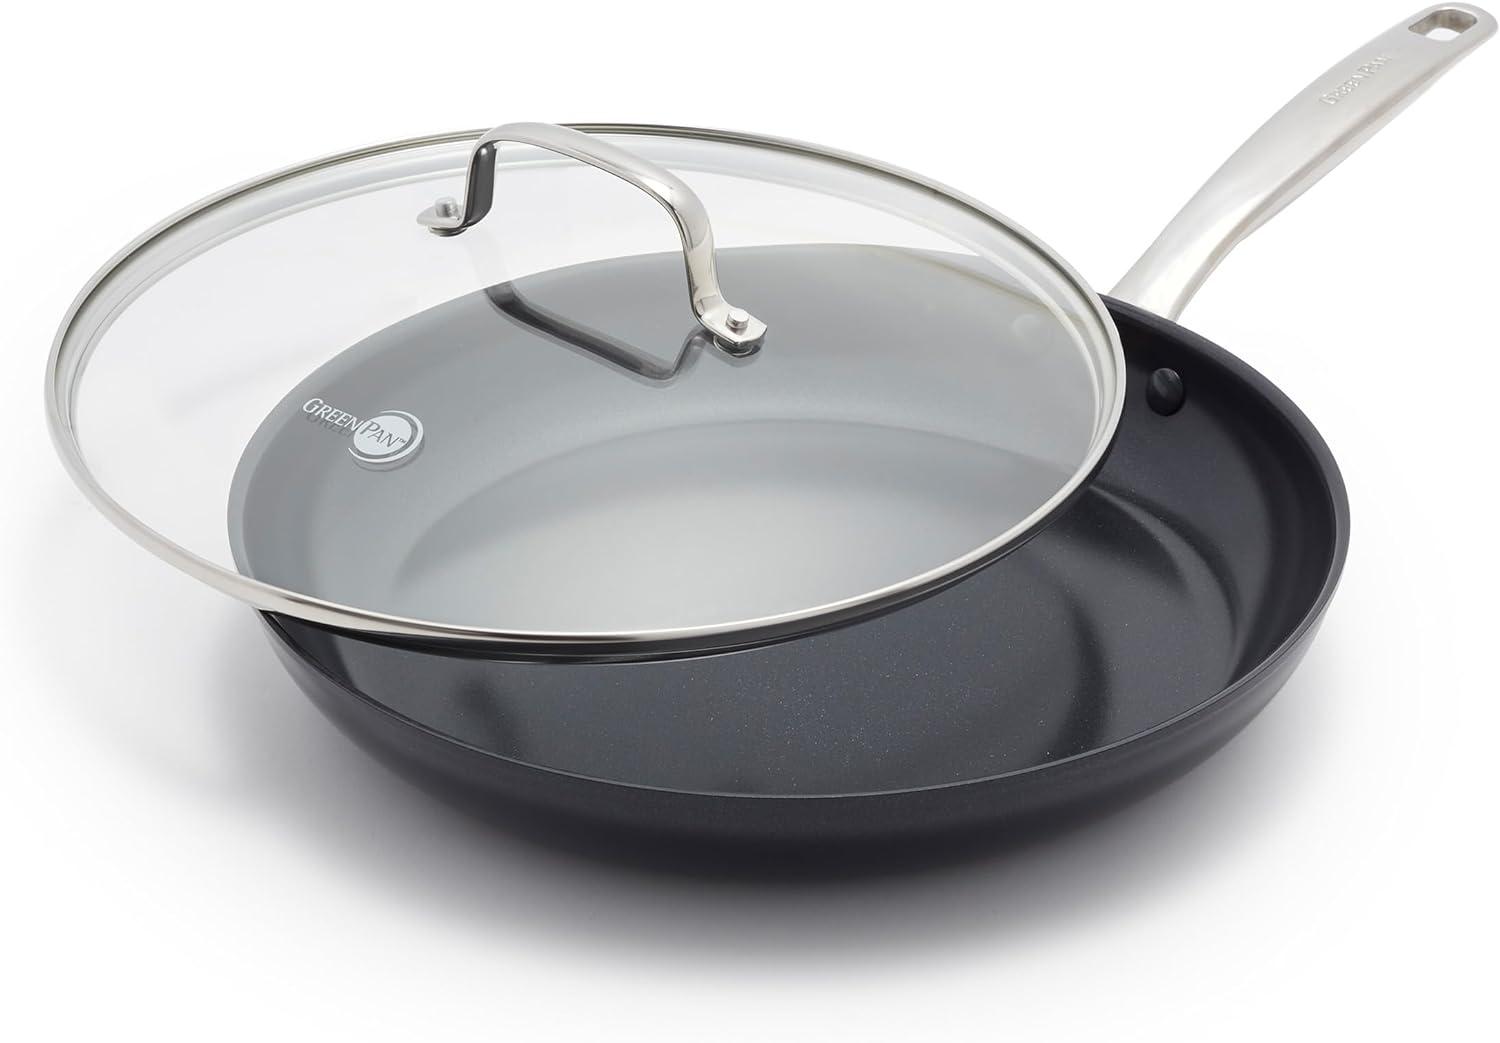 GreenPan Chatham Prime Hard Anodized Nonstick Pan for $27.12 Shipped